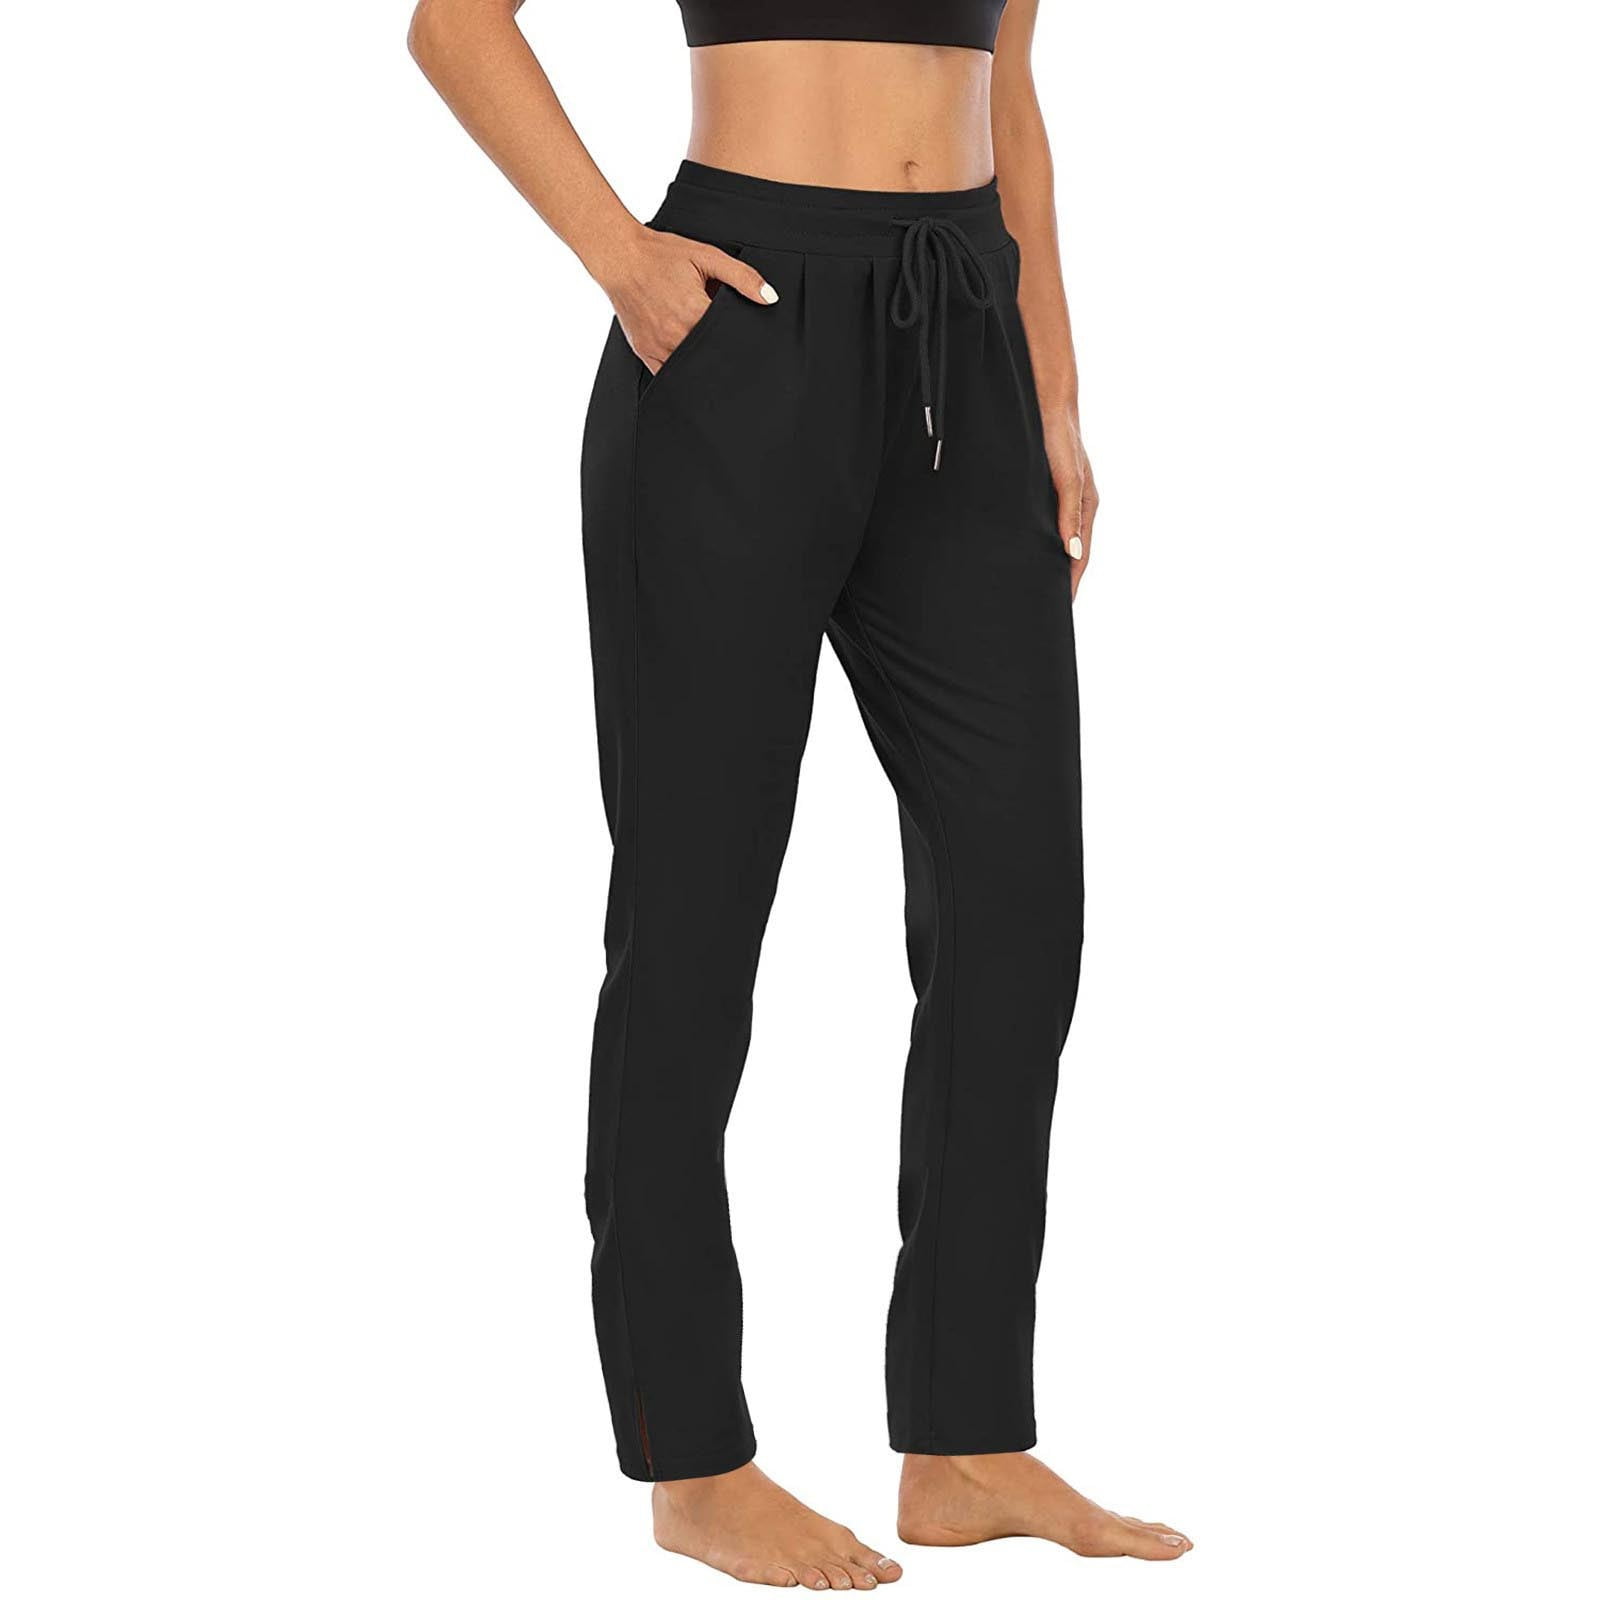 YWDJ Joggers for Women High Waist Plus Size Autumn Winter Yoga Sports Loose  Casual Long Pants Trousers With Pocket Black M 